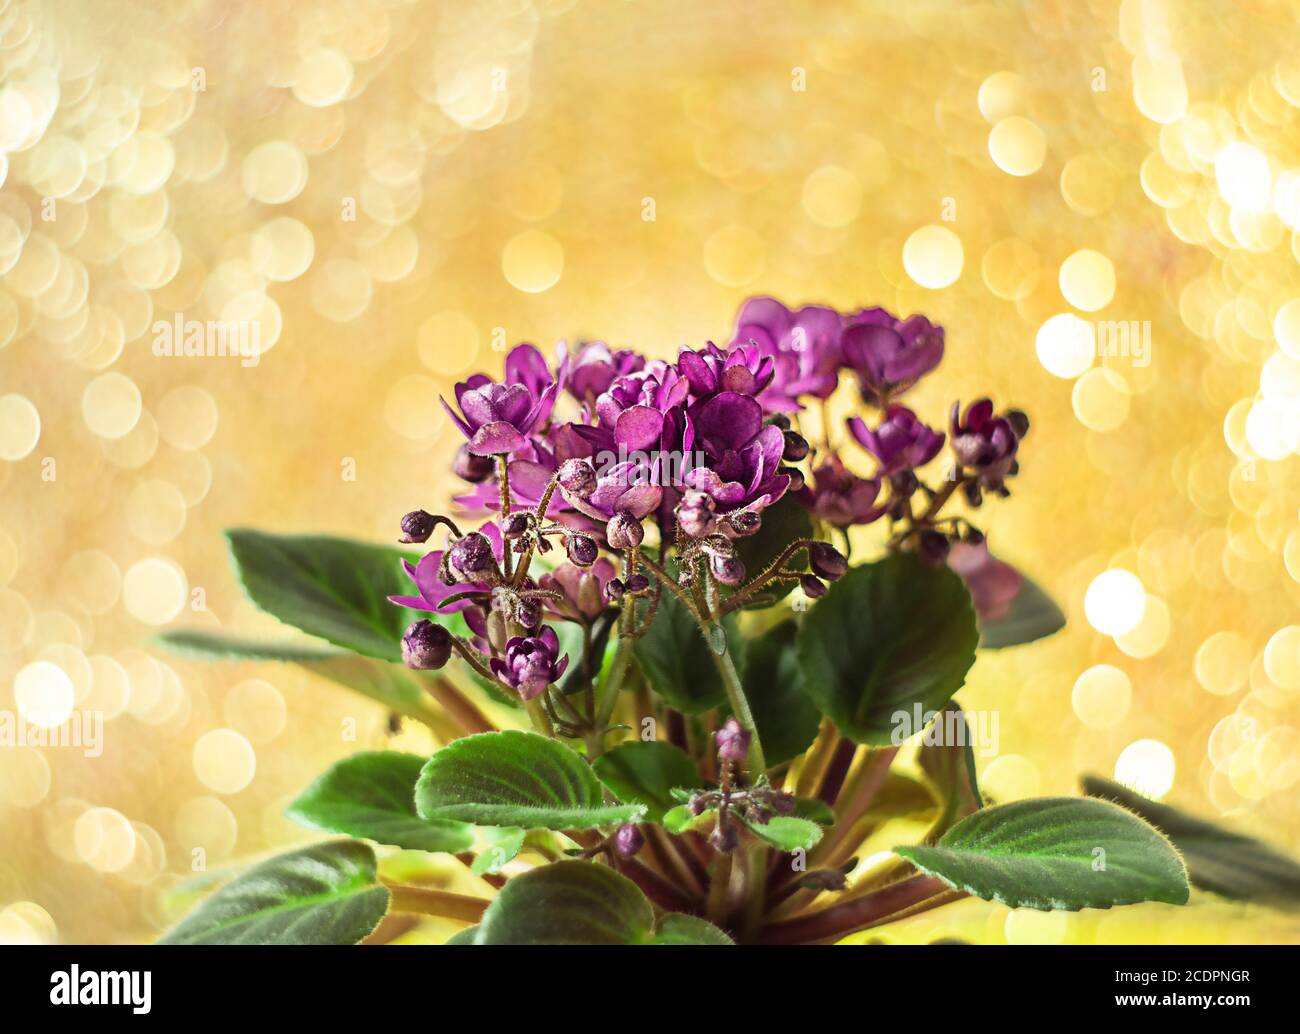 Flowering Saintpaulias, commonly known as African violet holiday on bokeh blurred background. Sparkling glitter bokeh. Stock Photo